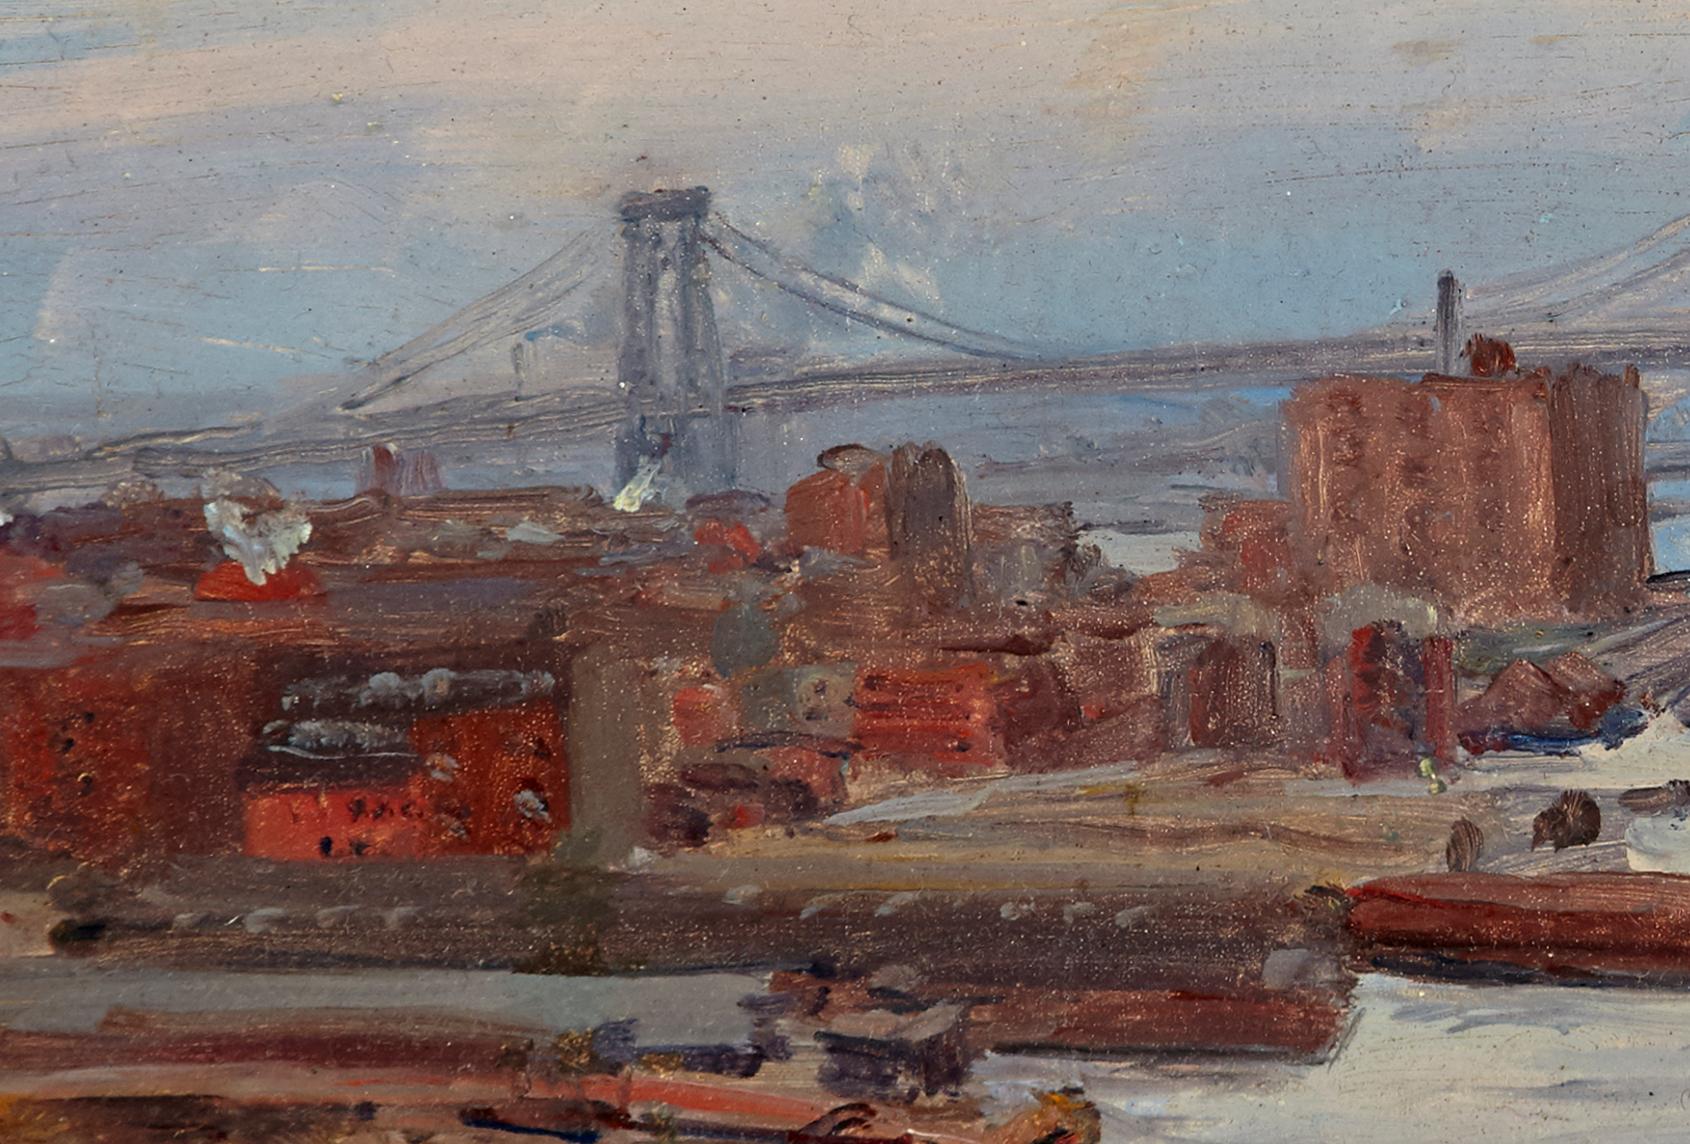 American 'East River, NYC Harbor' Unsigned Painting Oil on Board, Early 20th Century